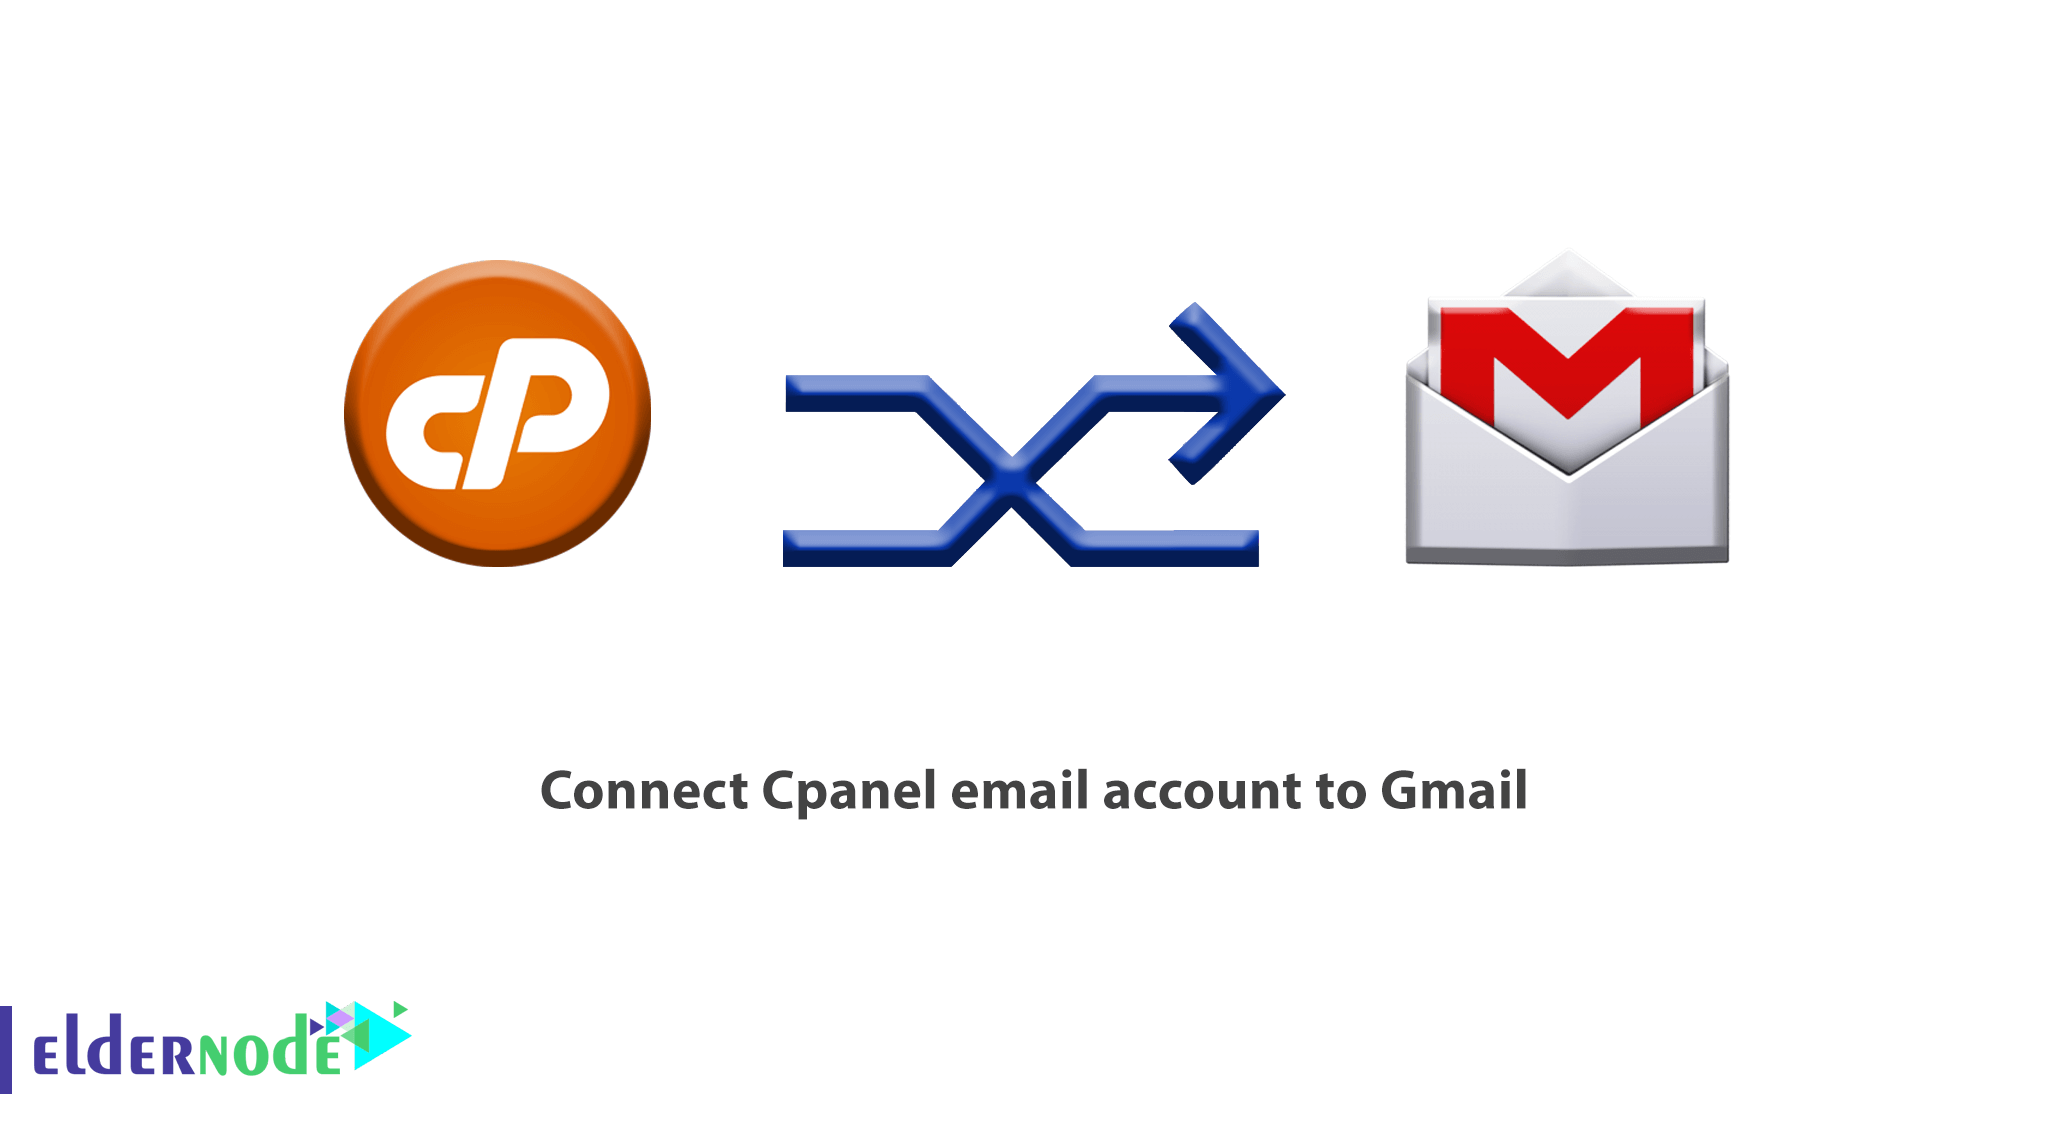 How to connect Cpanel email account to Gmail